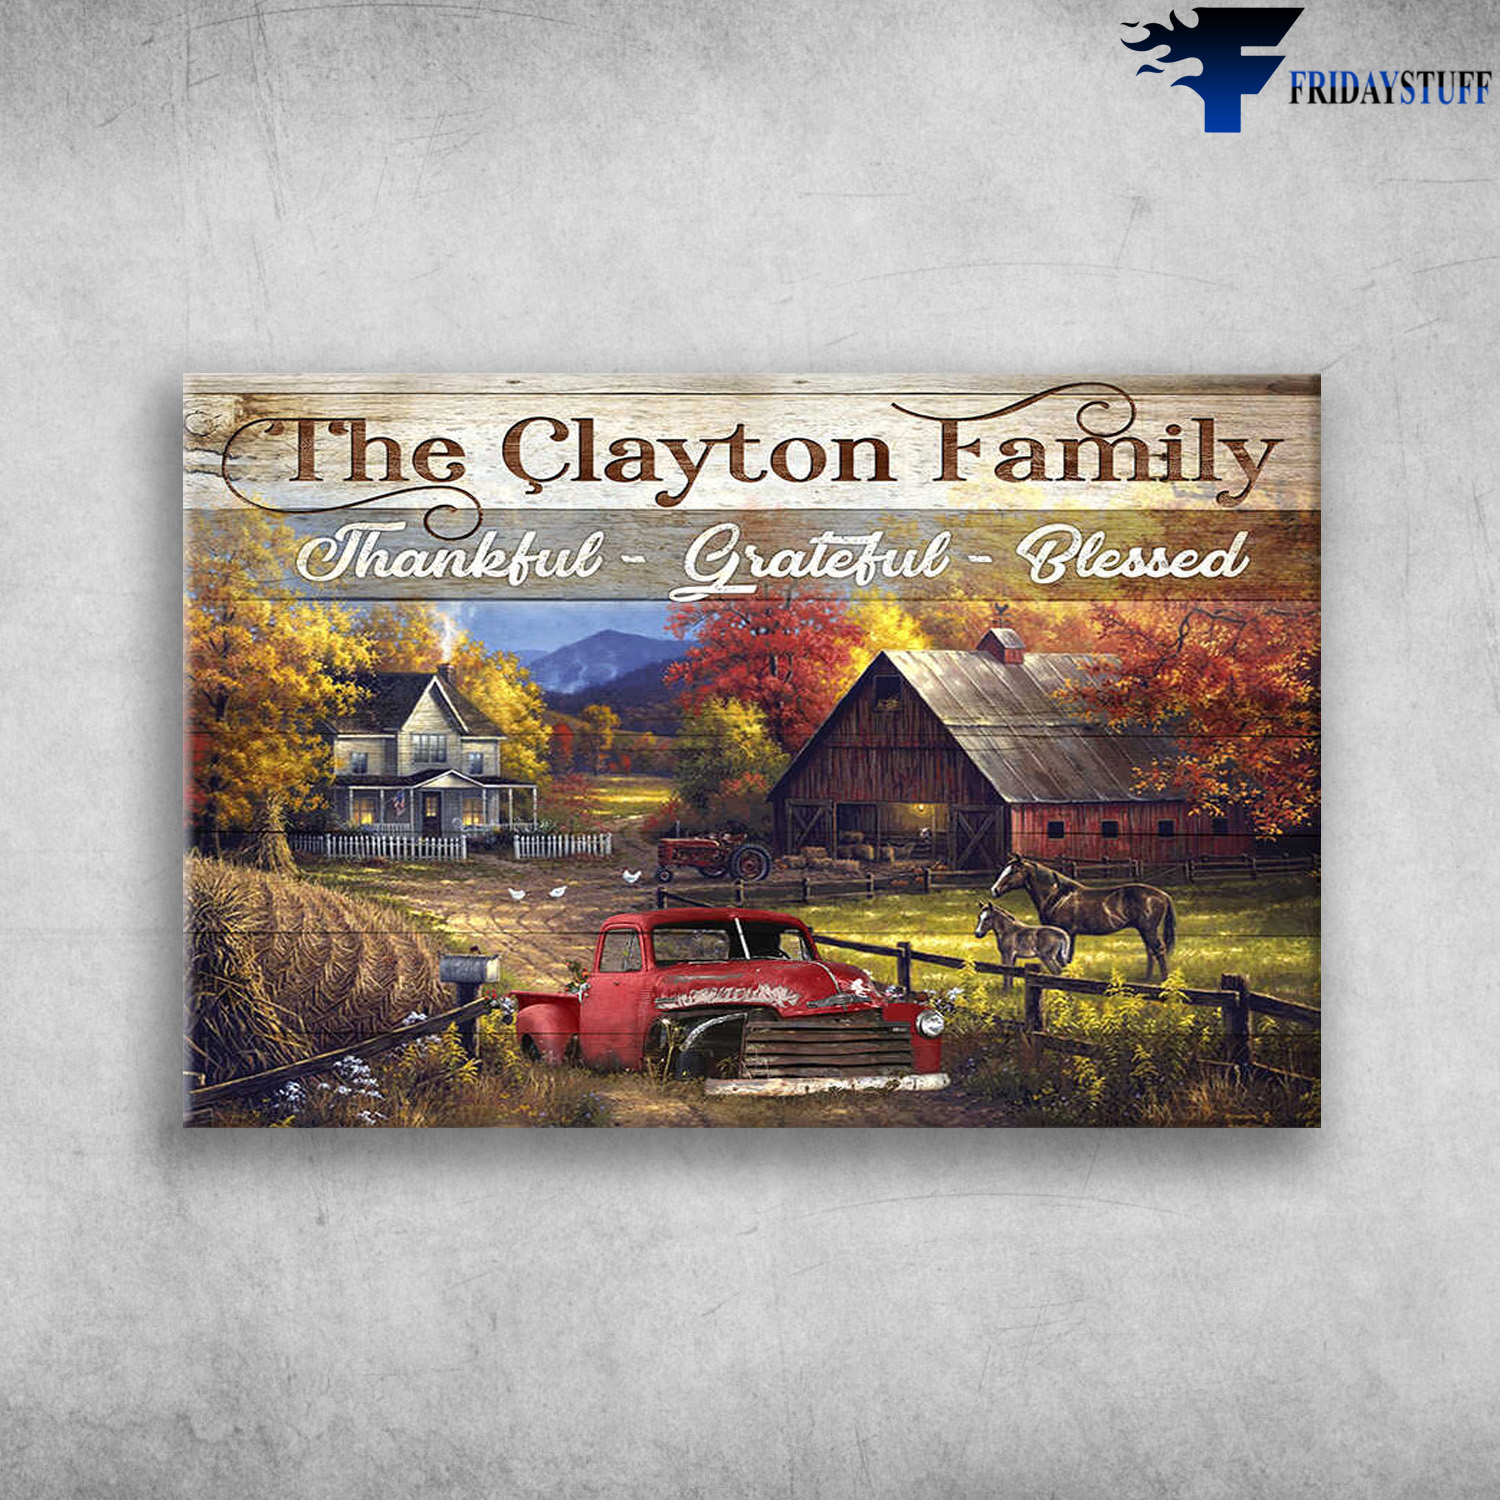 The Clayton Family - Thankful, Grateful, Blessed, Truck, House And Farmhouse